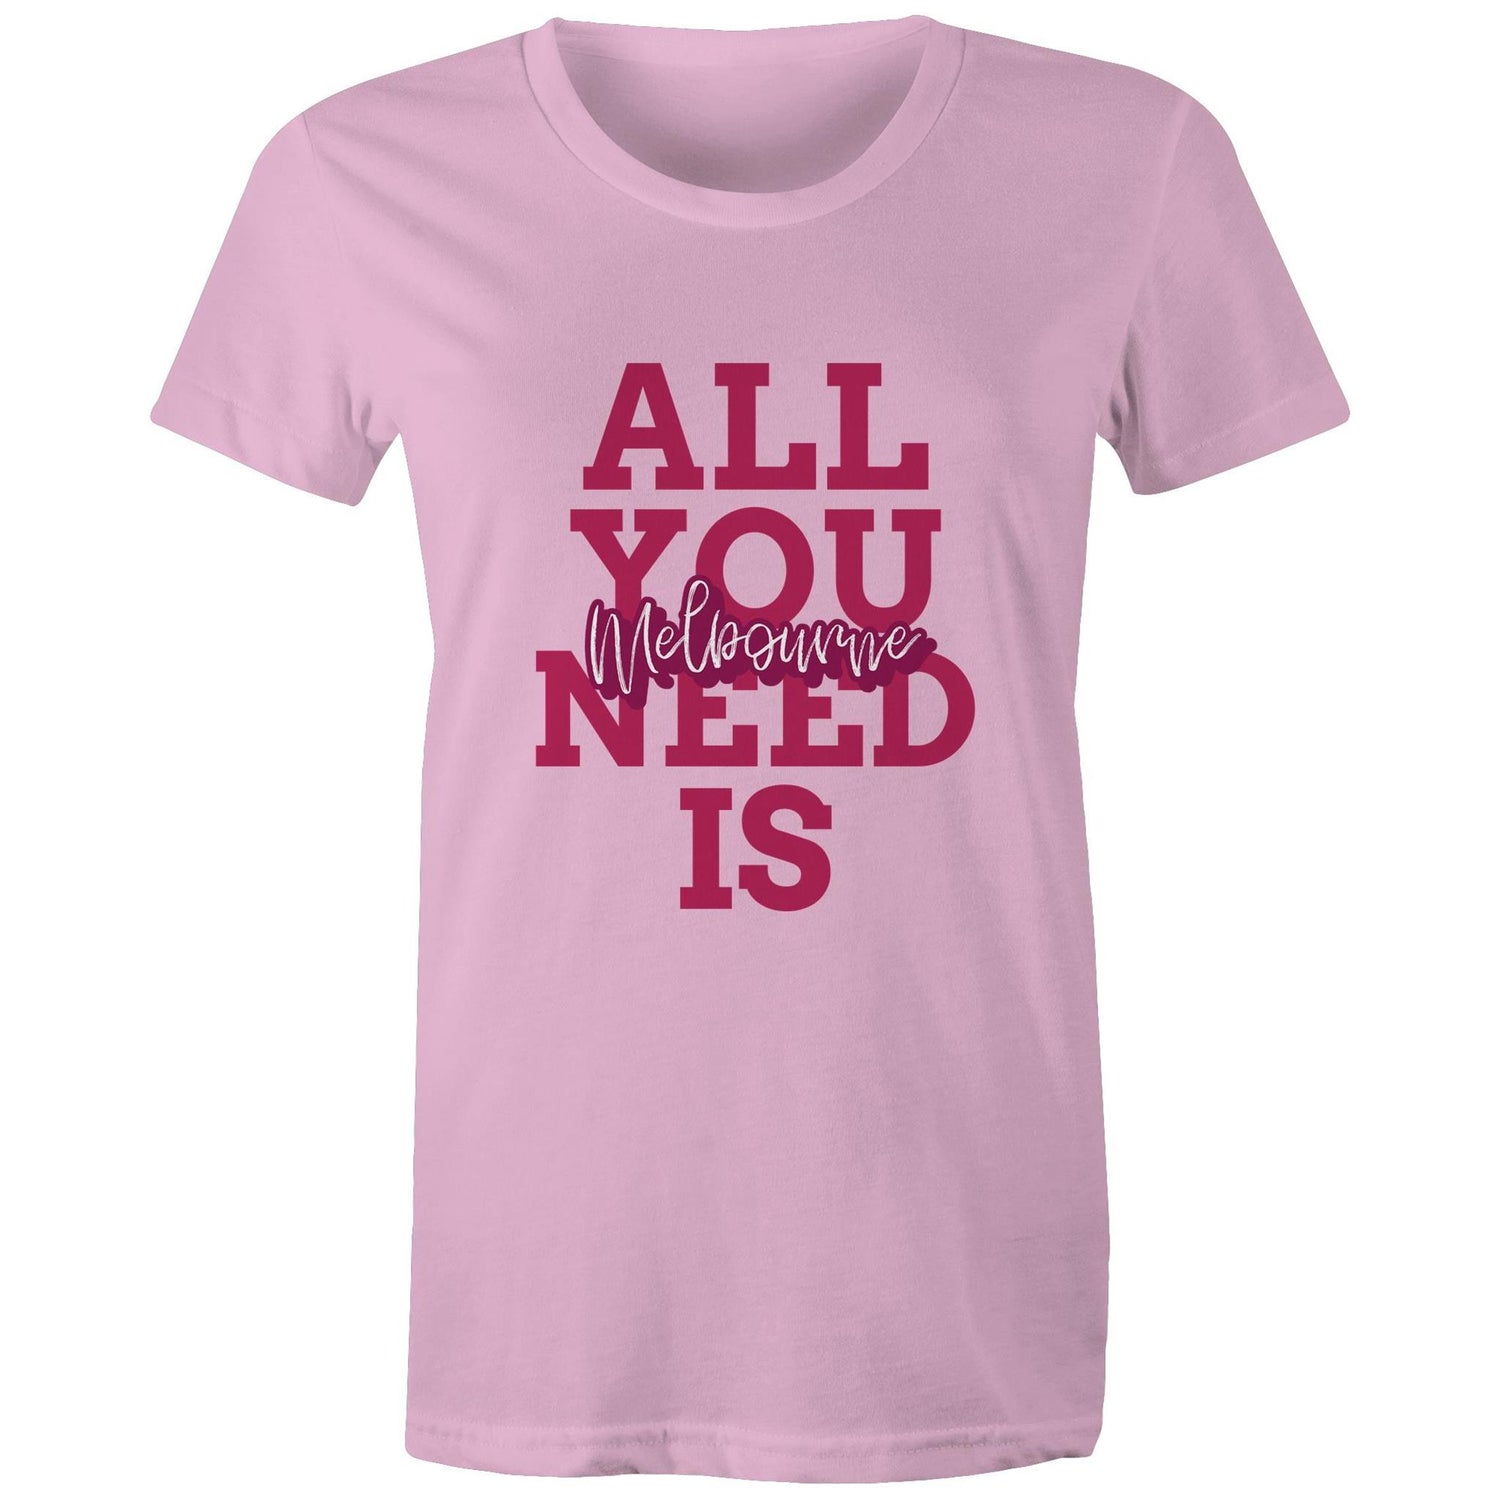 "All You Need Is Melbourne" - Women's Slogan T-Shirt